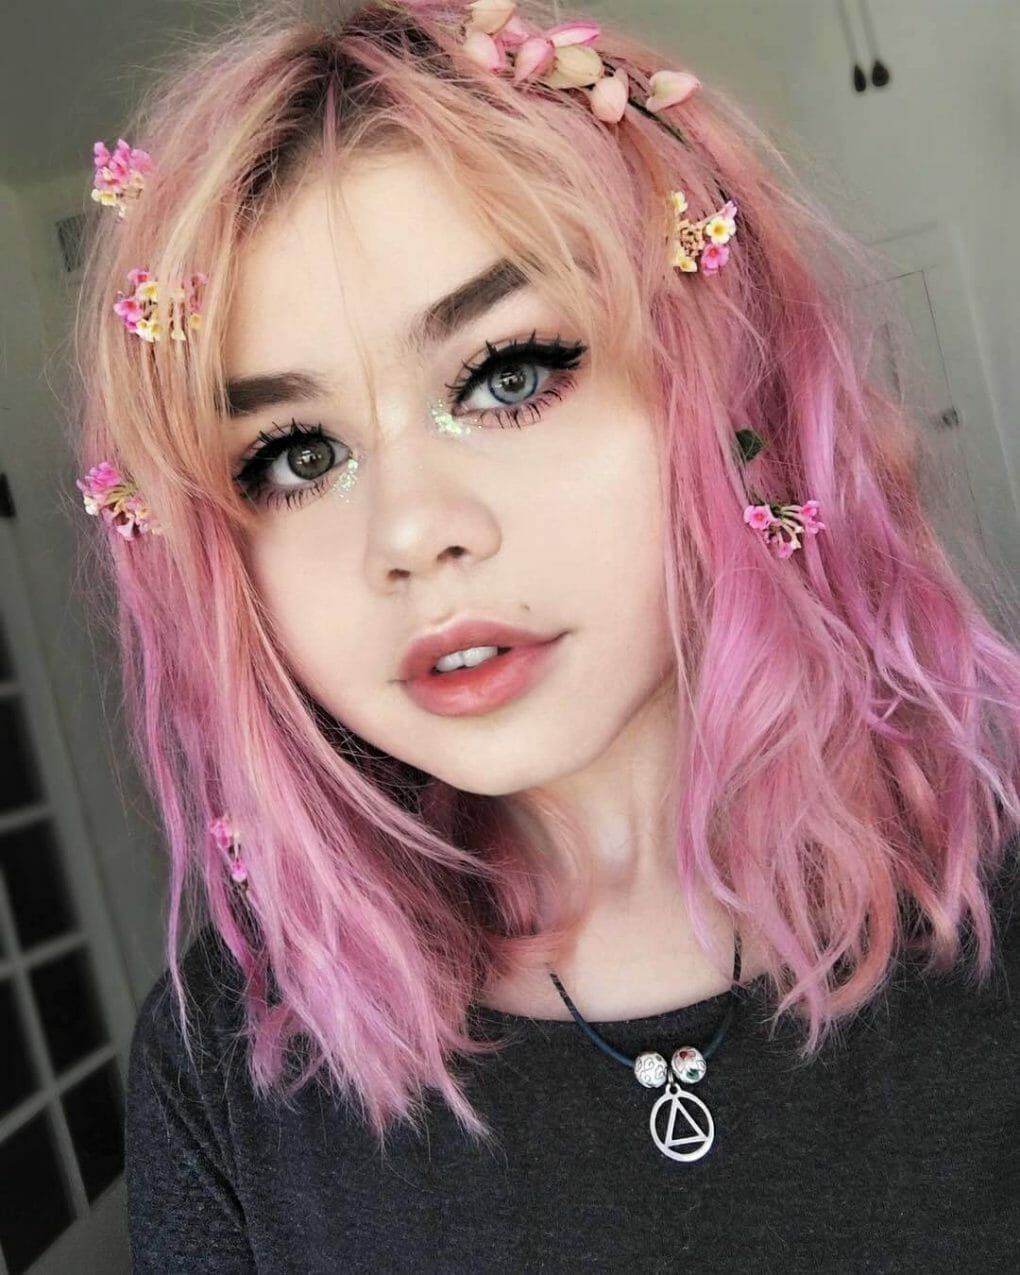 30 More Edgy Hair Color Ideas Worth Trying - 30 More Edgy Hair Color Ideas Worth Trying -   15 edgy beauty Aesthetic ideas